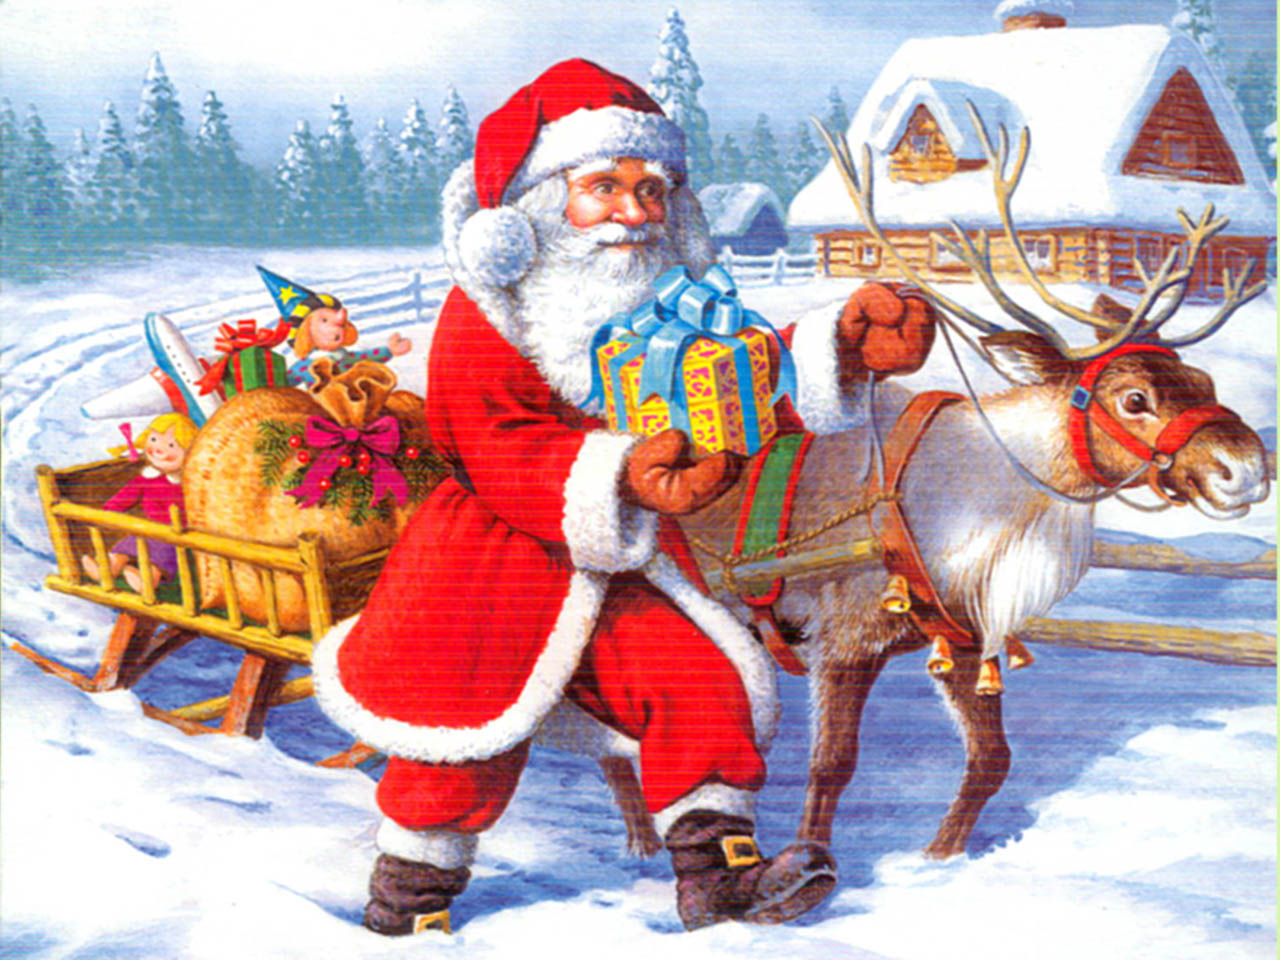 And These Awesome New Santa Claus Pictures Of High